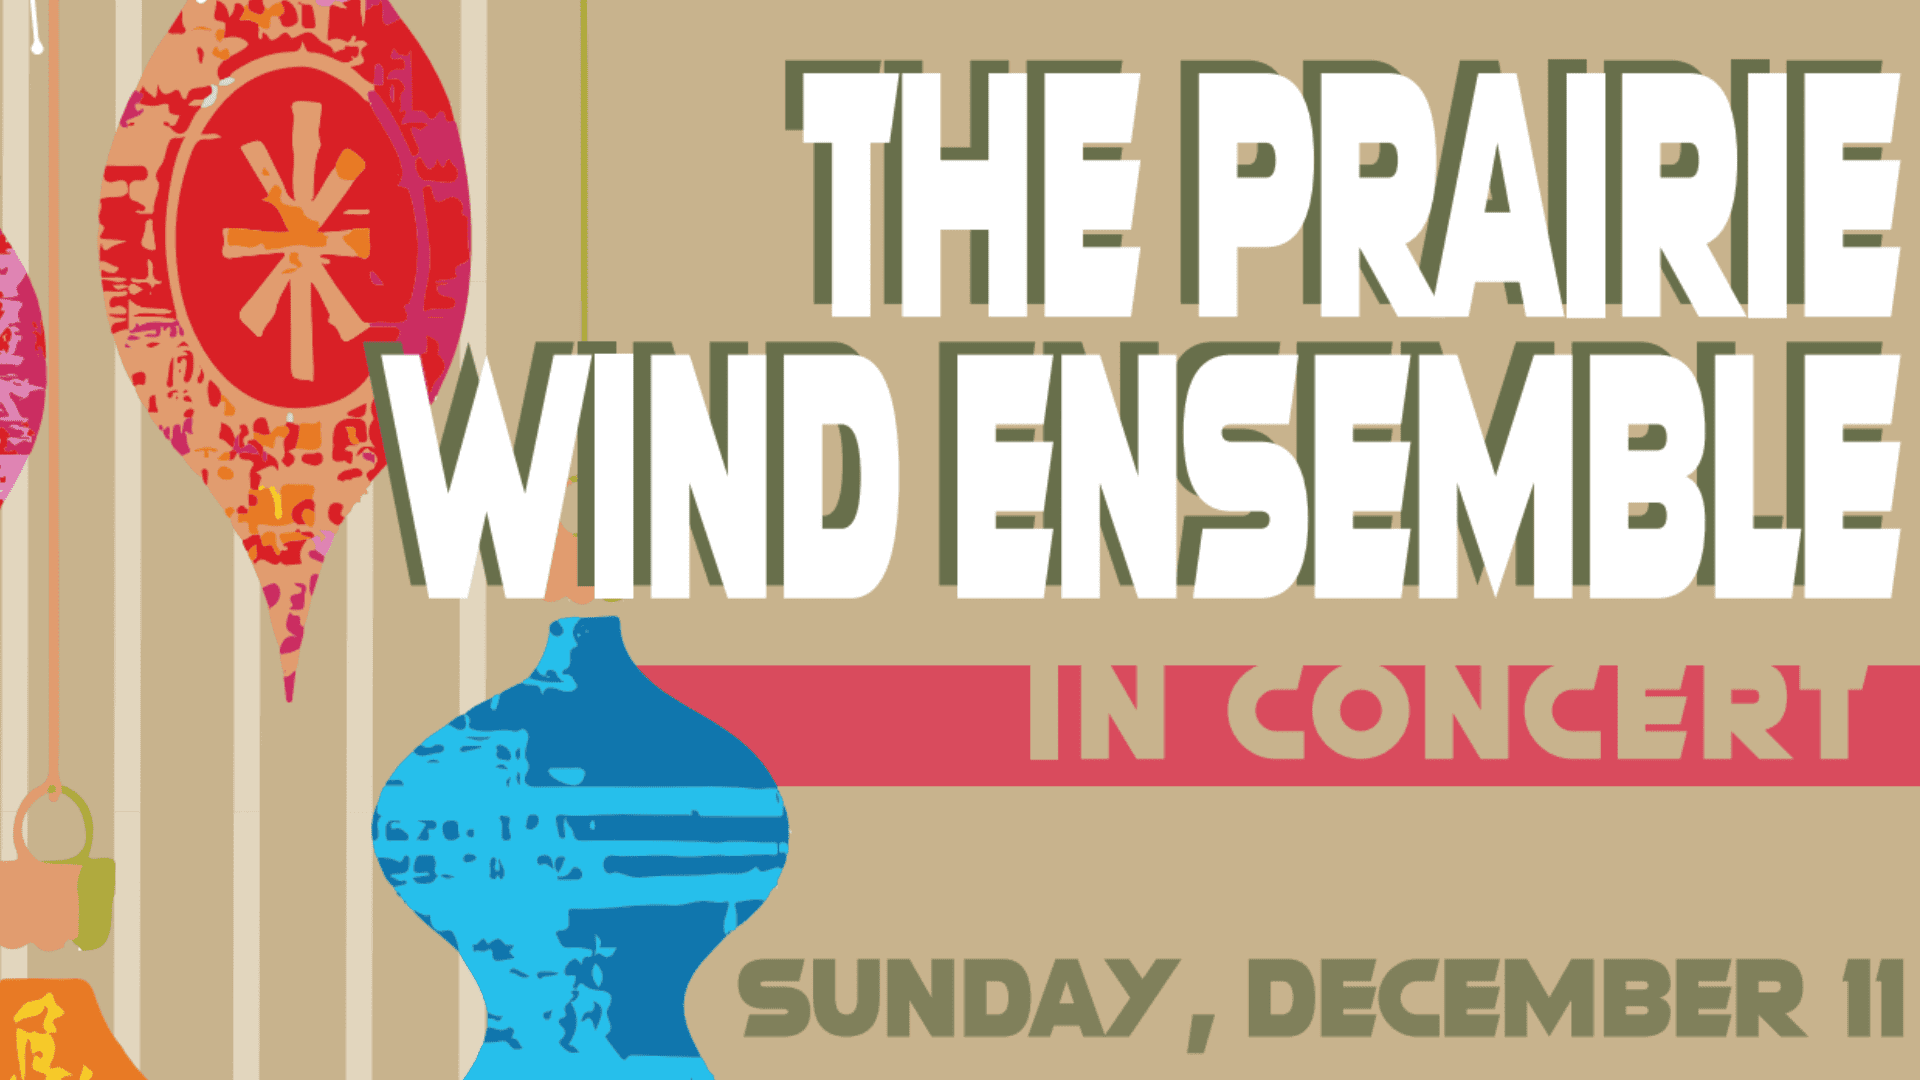 A flyer about the information about The Prairie wind ensemble